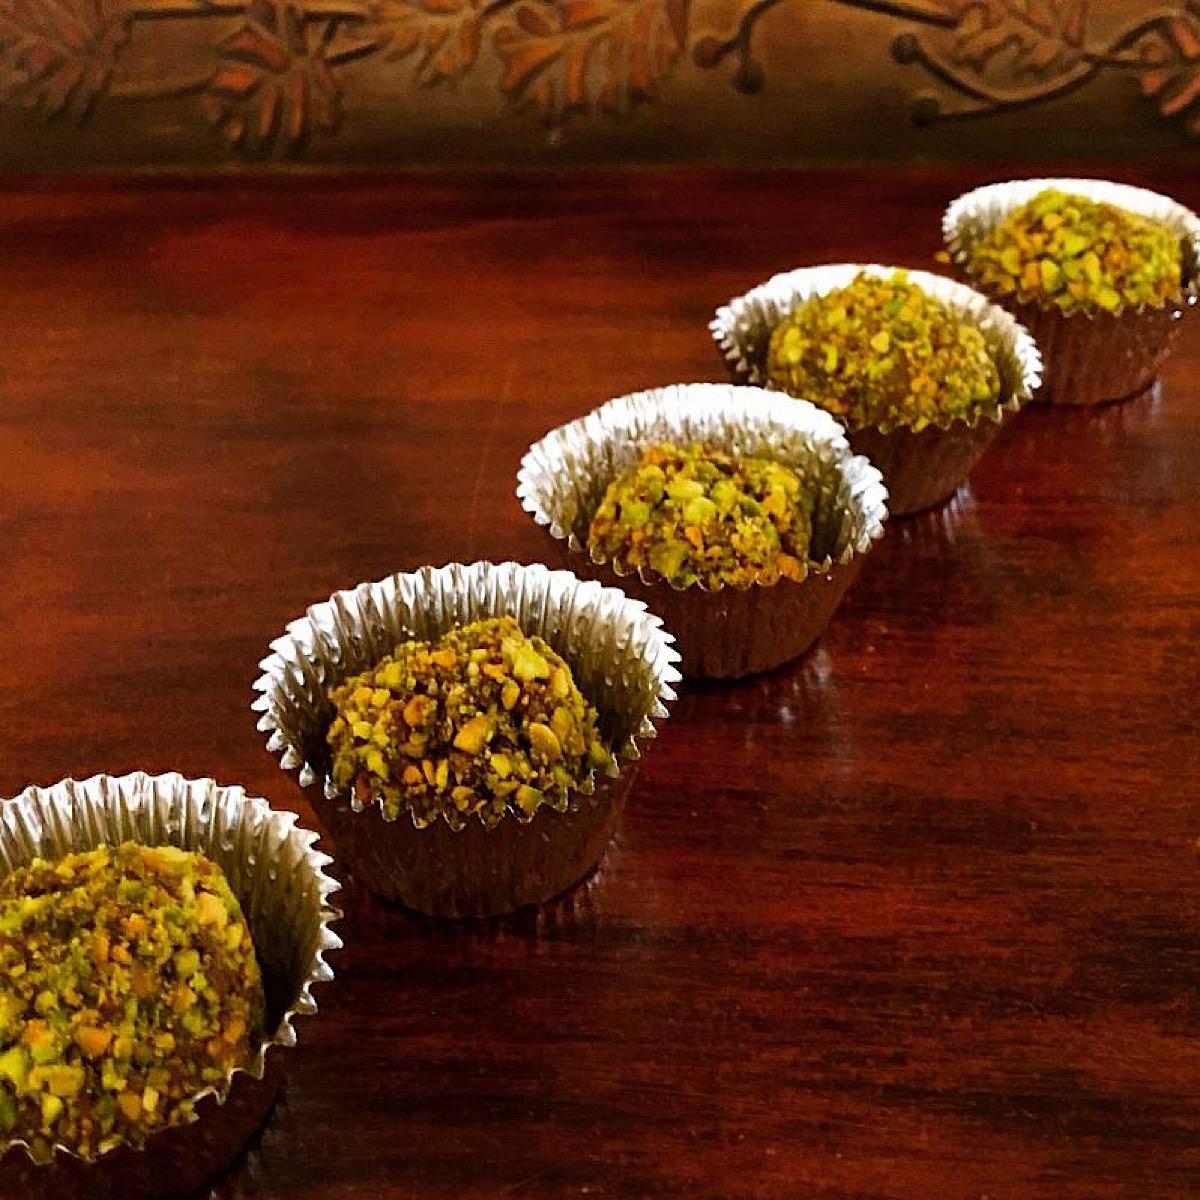 Low carb or keto chocolate truffles with pistachio coating